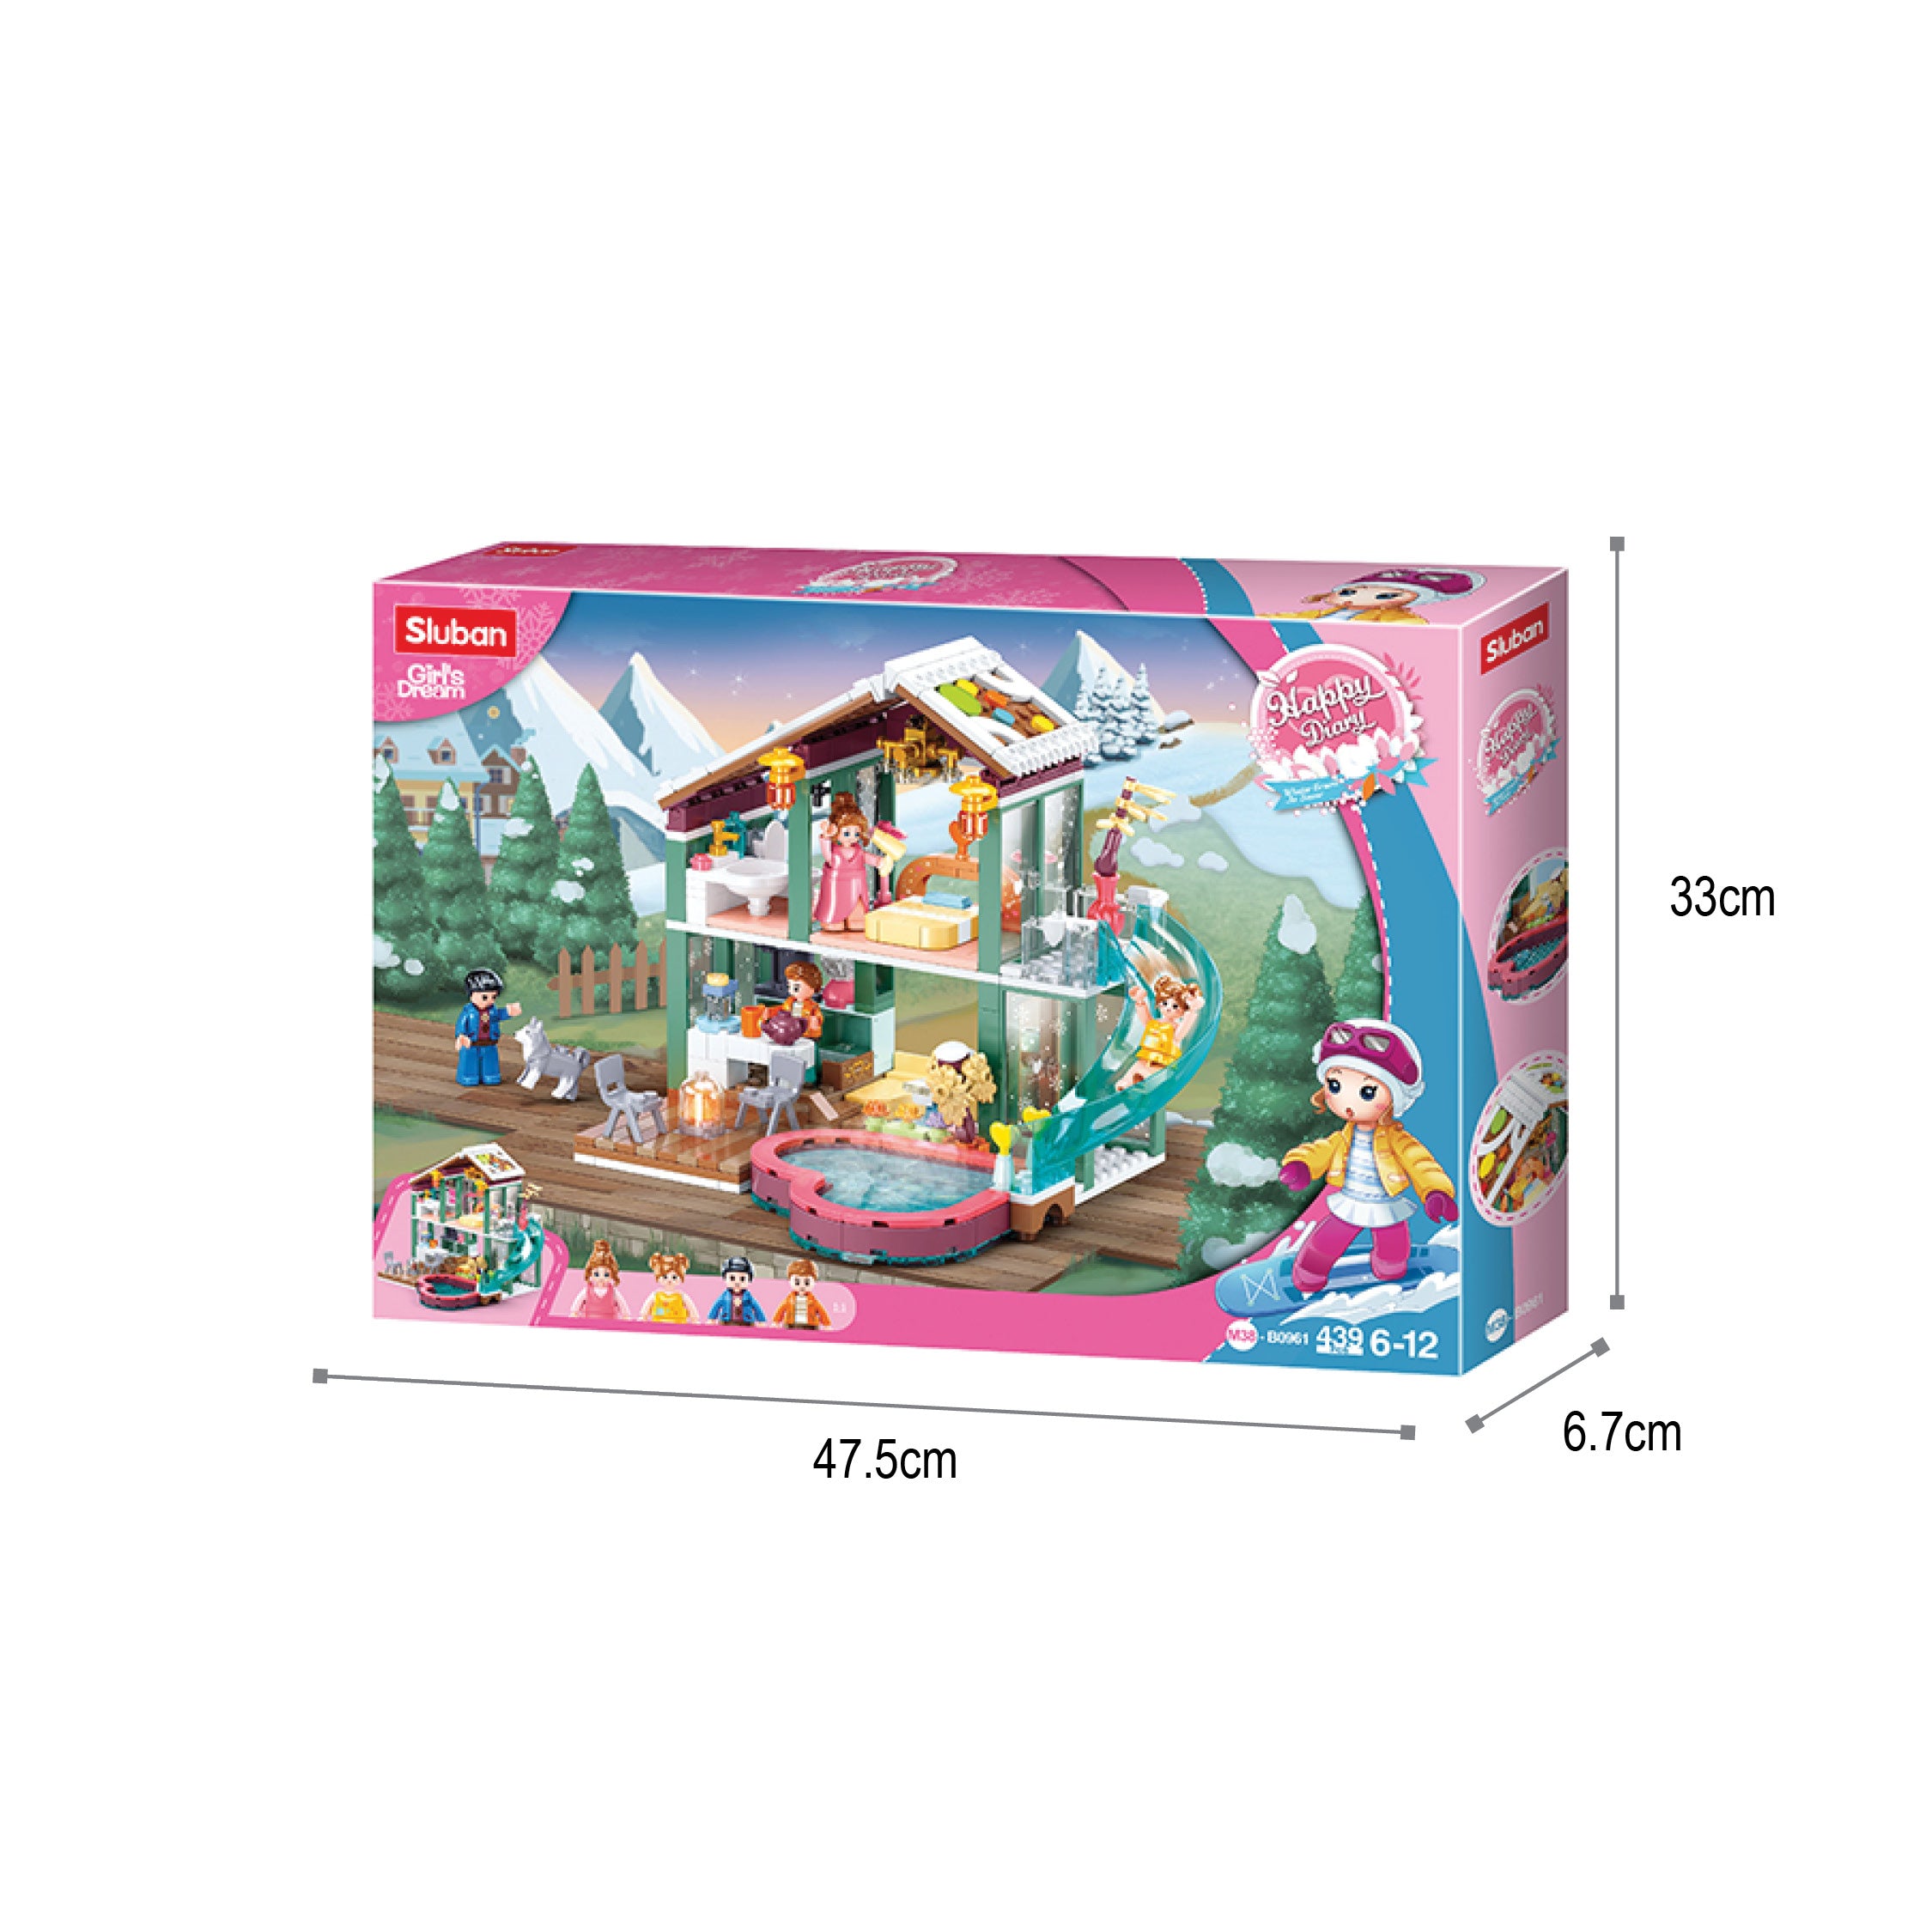 SLUBAN® Happy Diary(Winter Travel In Snow)-Resort(439pcs) (M38-961) Building Blocks Kit For Girls Aged 6 Years And Above Creative Construction Set Educational  STEM Toy